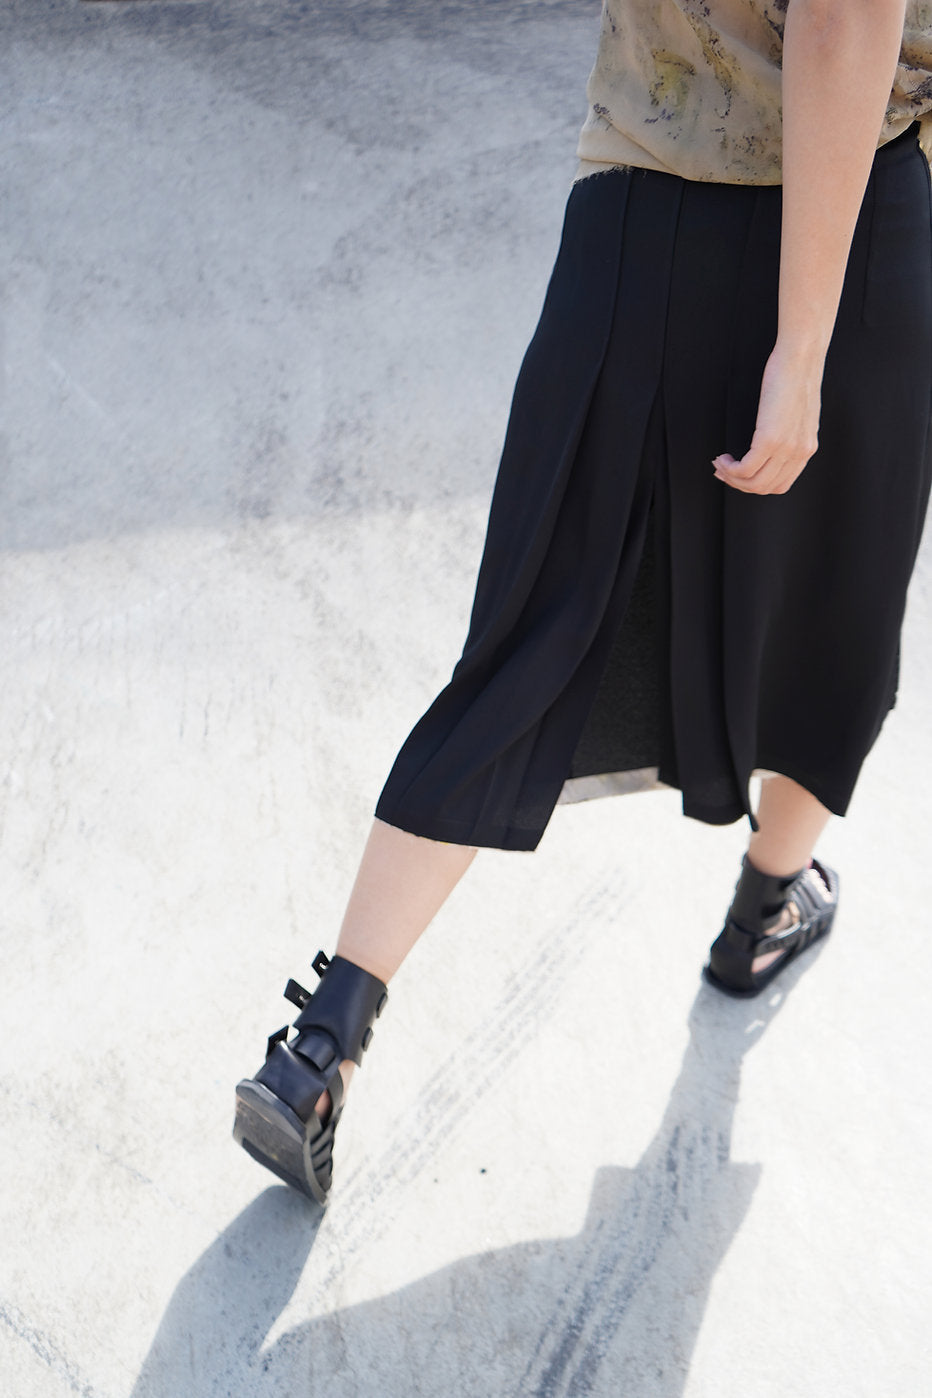 Fashion-forward black midi skirt, perfect for diverse styling occasions.